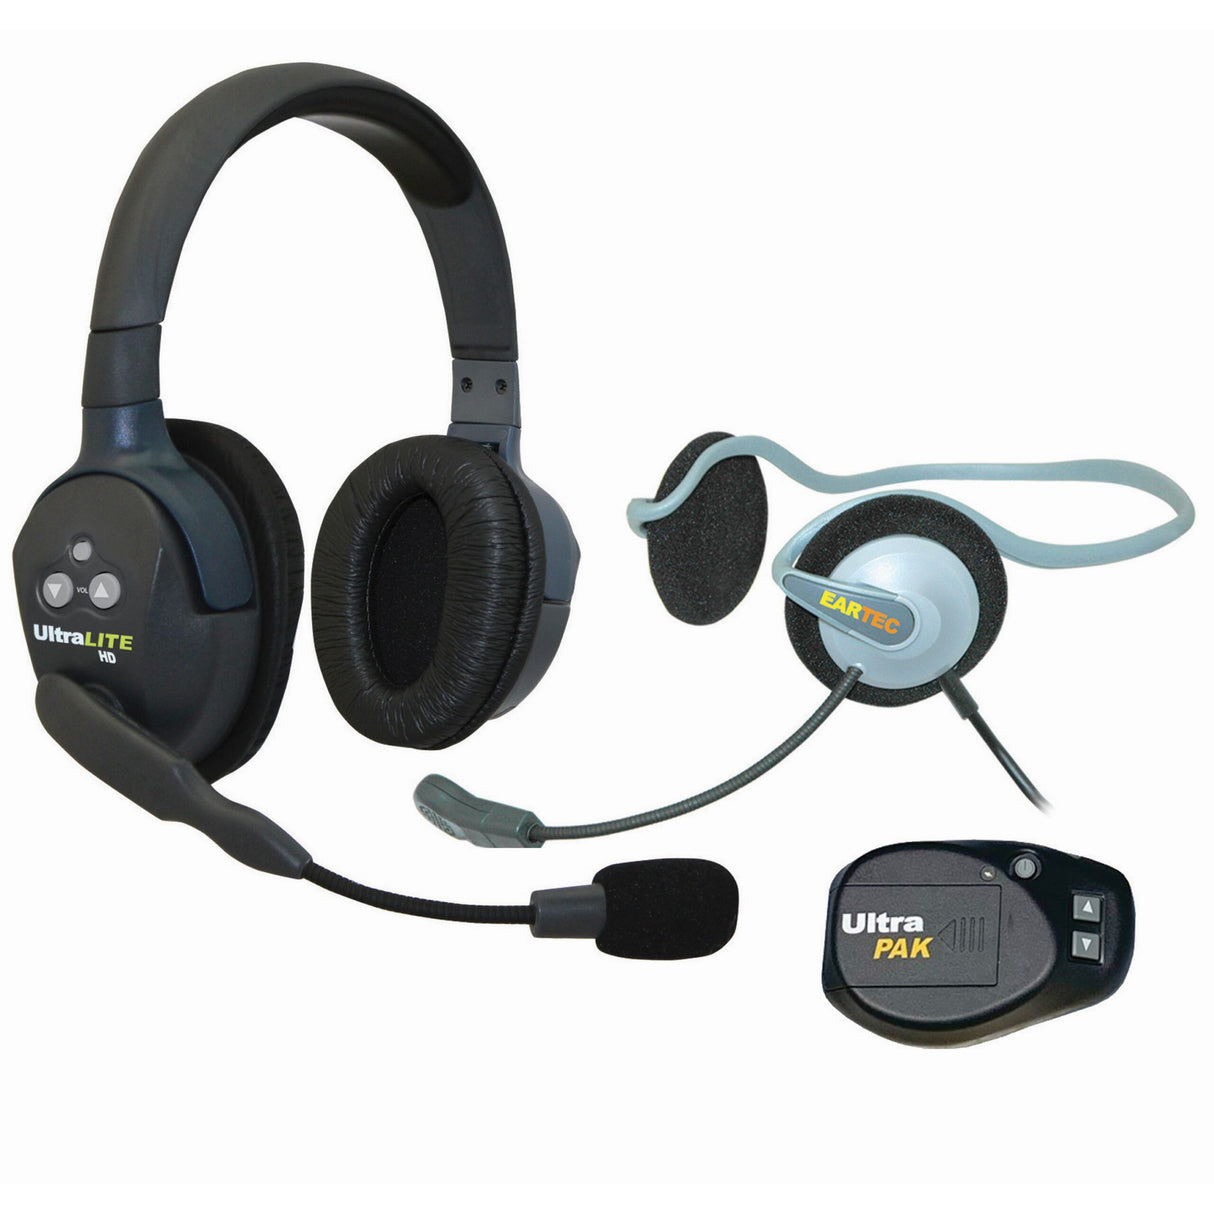 Eartec DMMON3 1 Double MAIN UltraLITE and 2 Monarch/UltraPAK Headsets